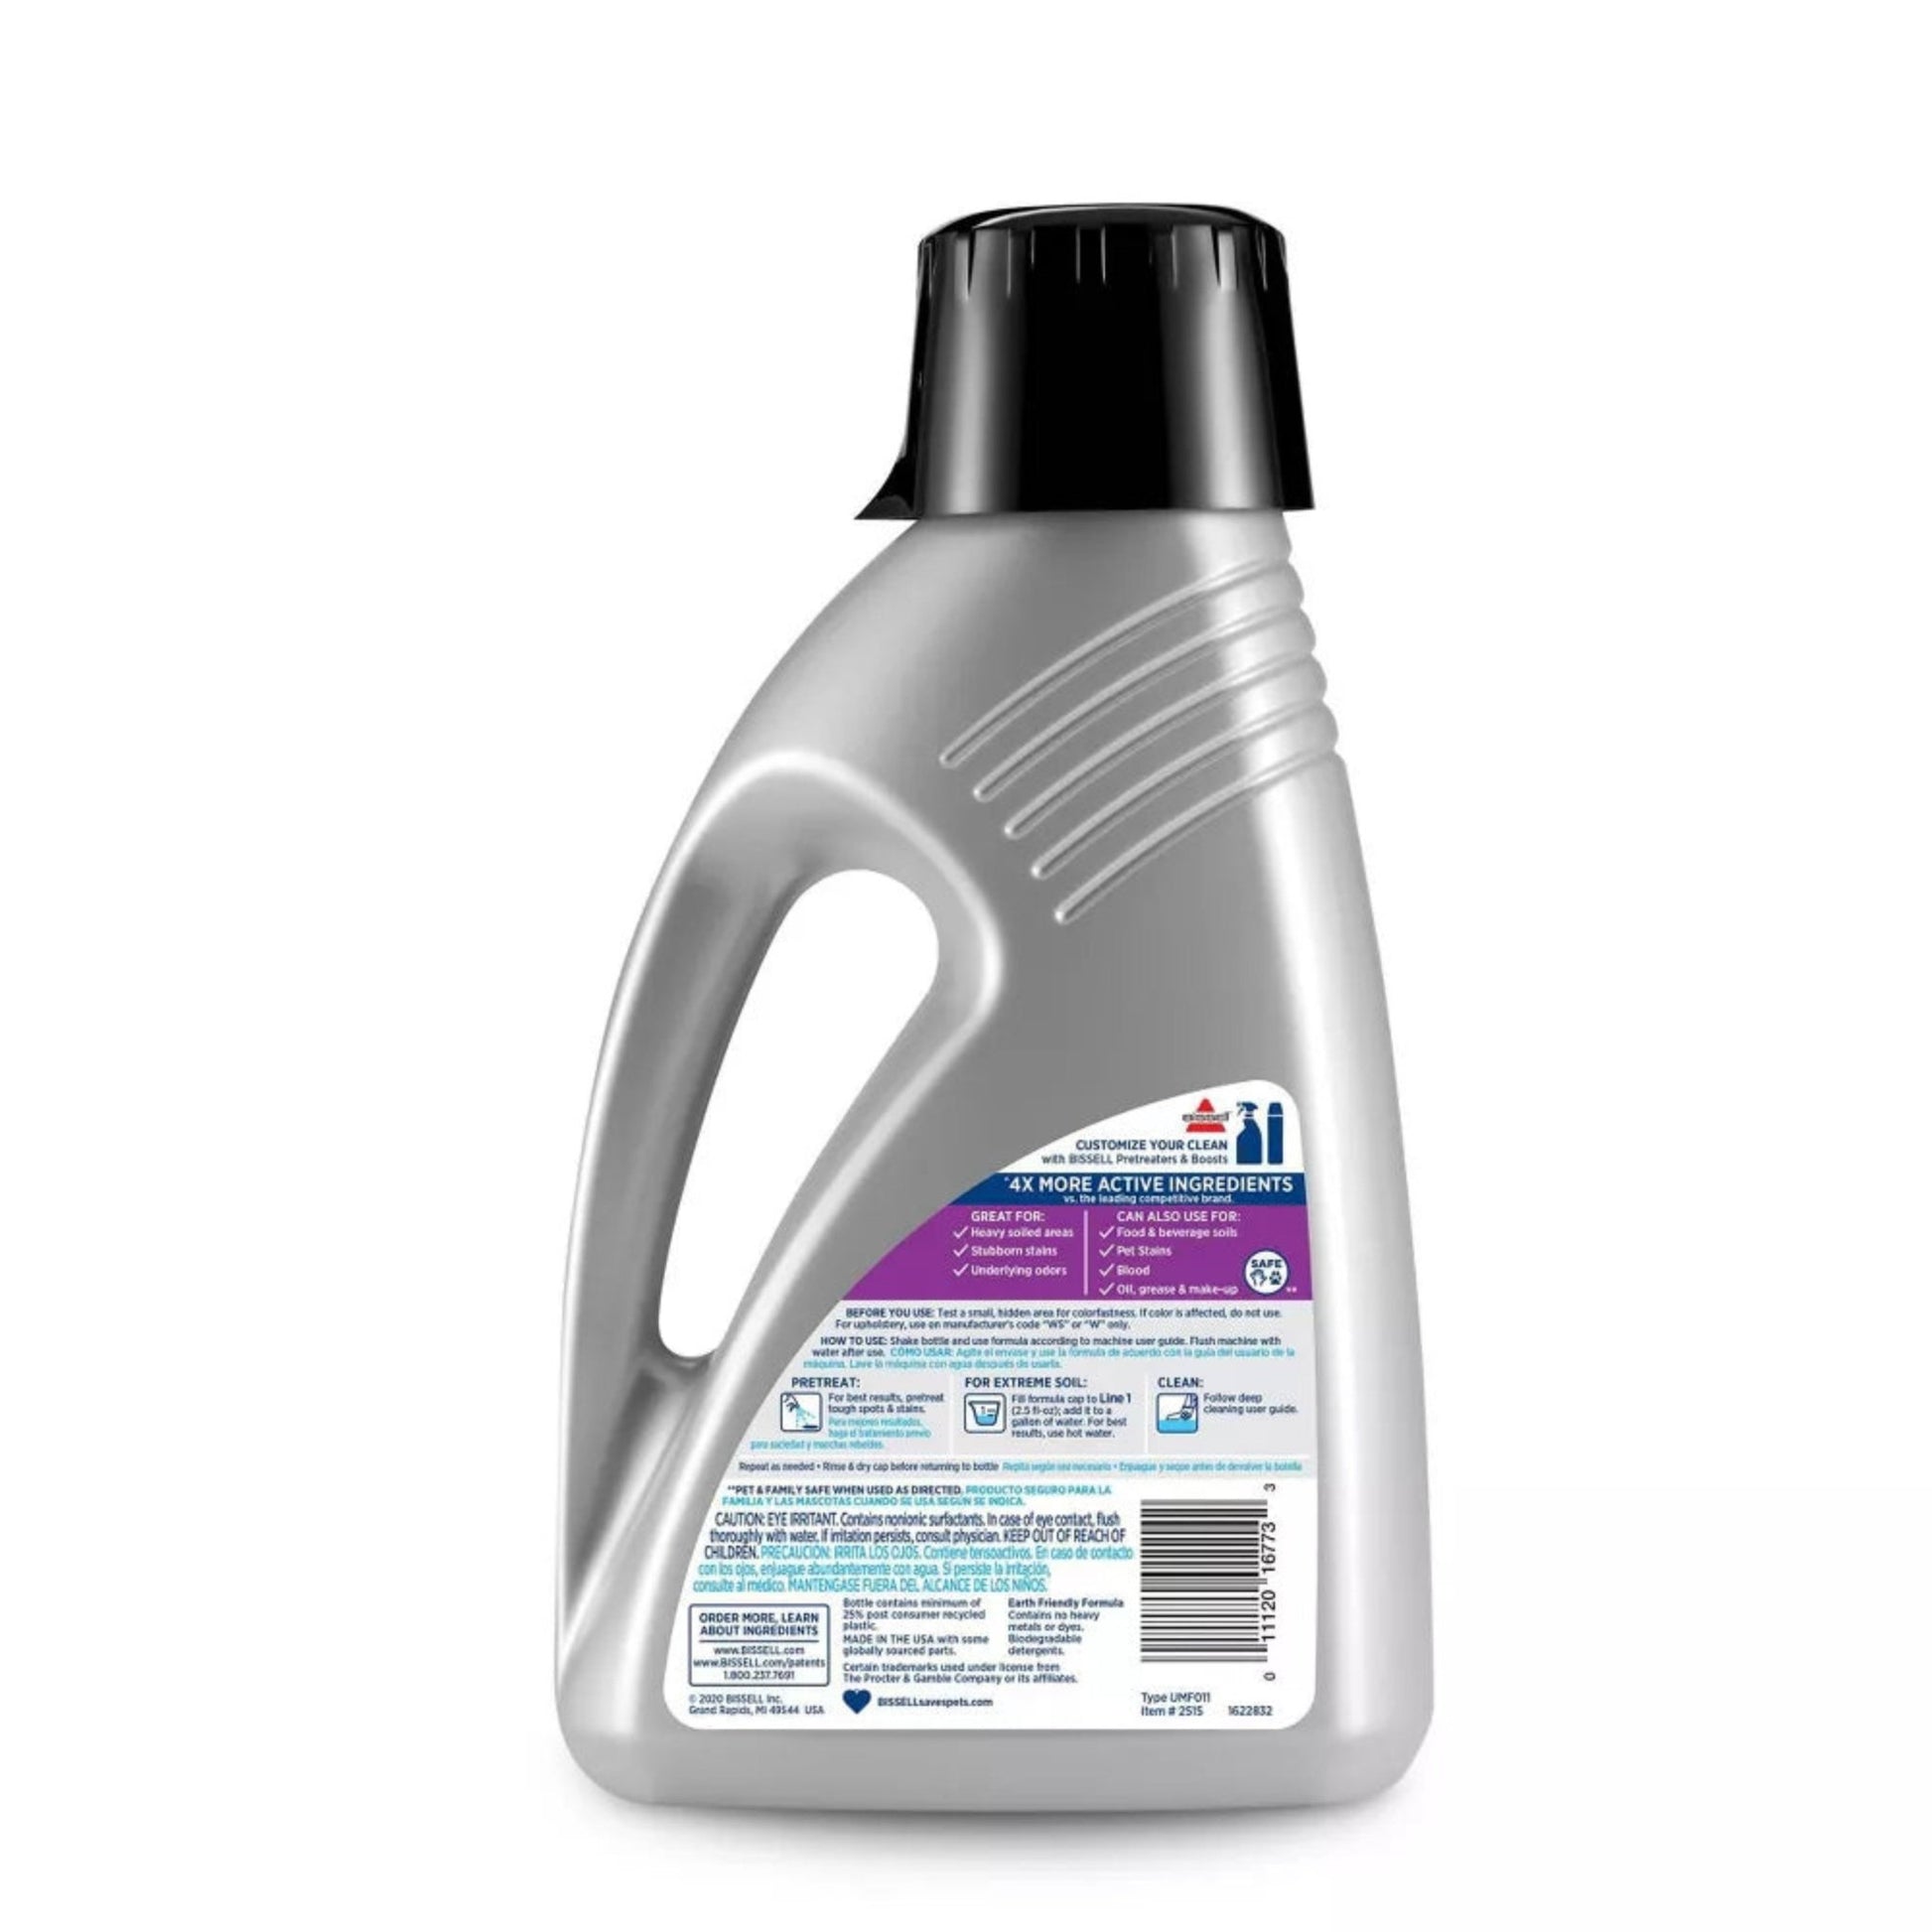 BISSELL-BISSELL 1.41L Professional Cleaning Formula with Febreze - Brandat Outlet